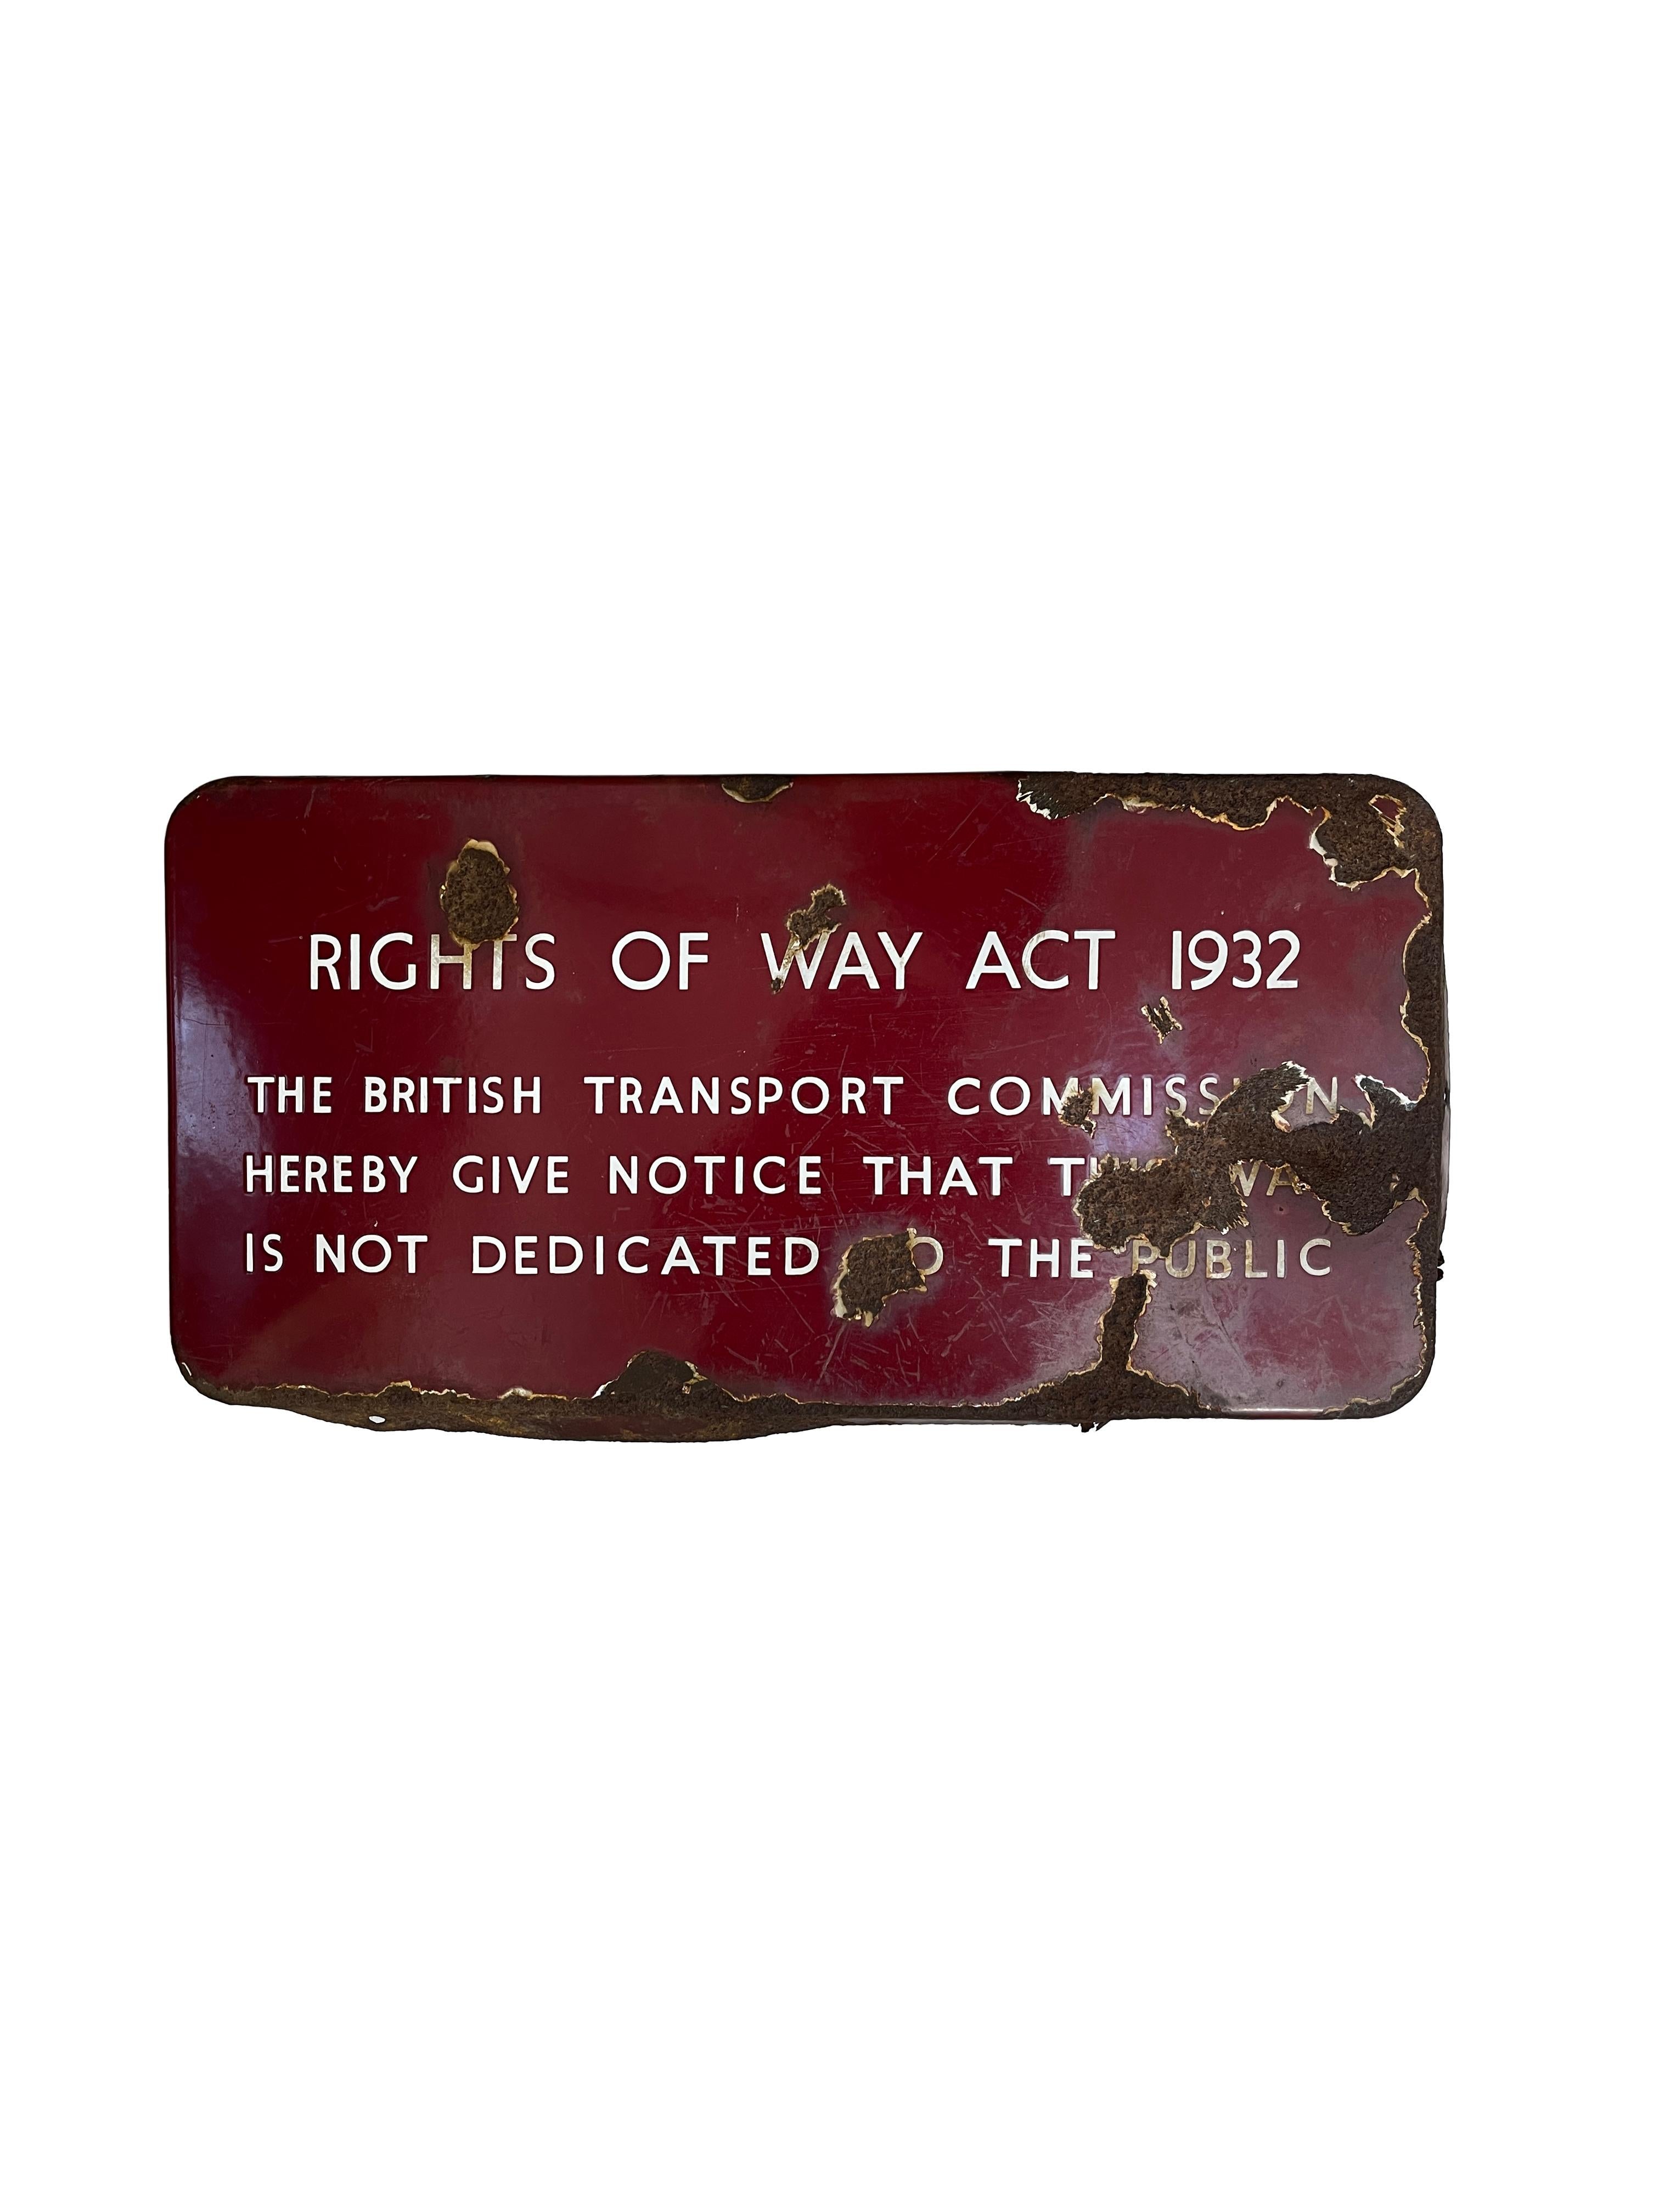 - An original British Rail sign, circa 1940.
- This Midlands Region sign has the inscription 'Rights Of Way Act 1932 The British Transport Commission Hereby Give Notice That This Way Is Not Dedicated To The Public'.
- The enamel is worn in places